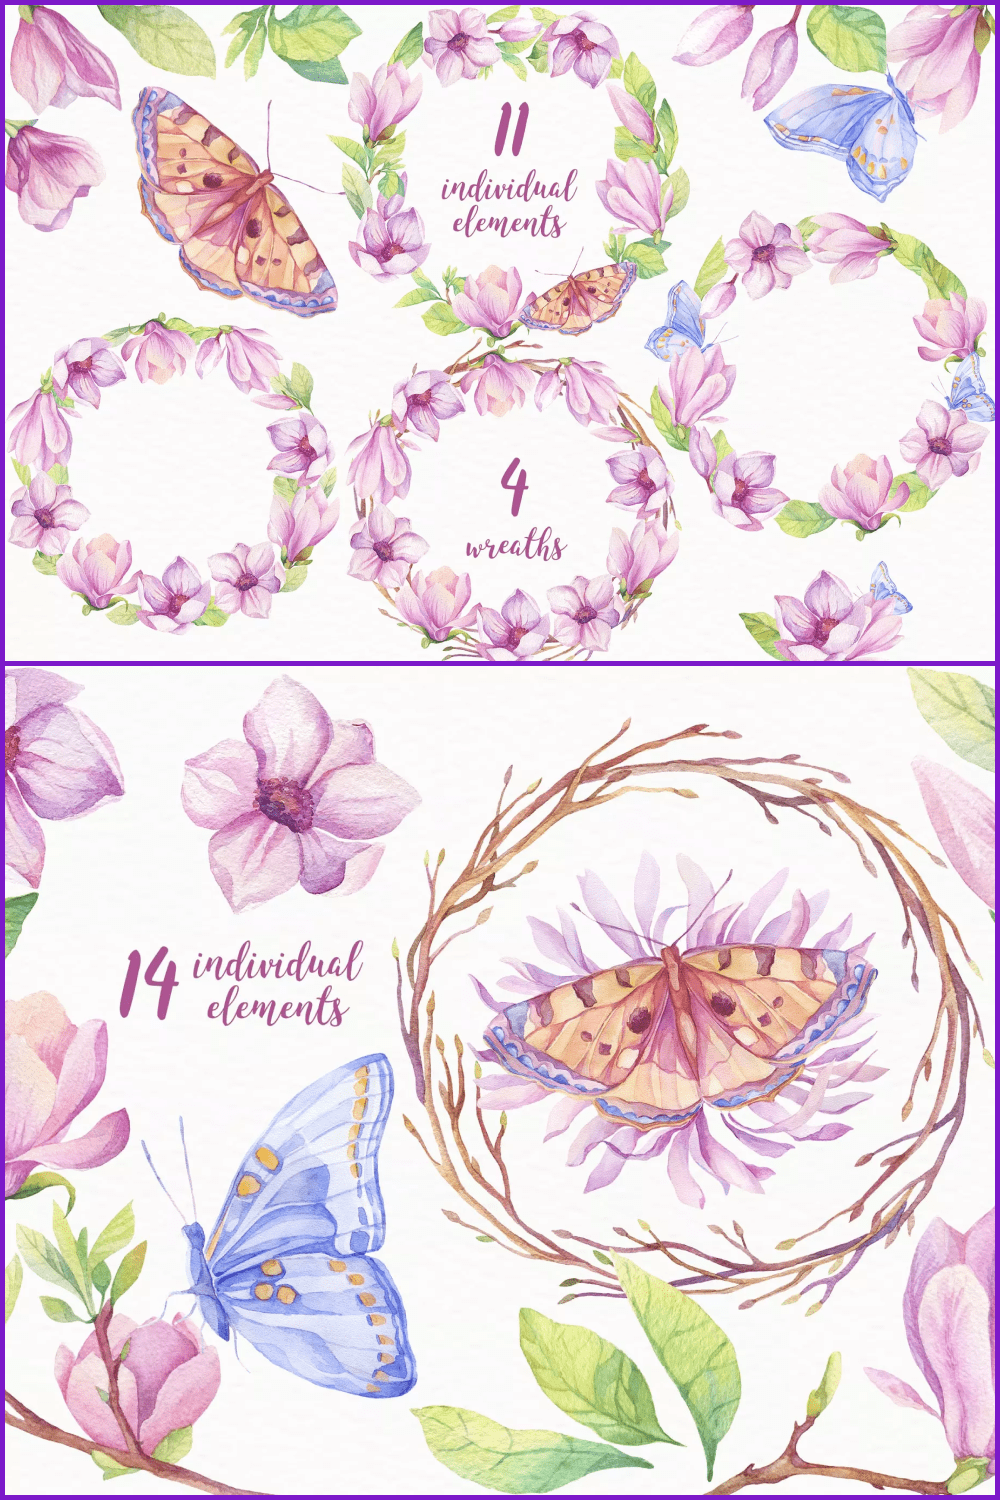 Butterflies and summer flowers in pink colors.